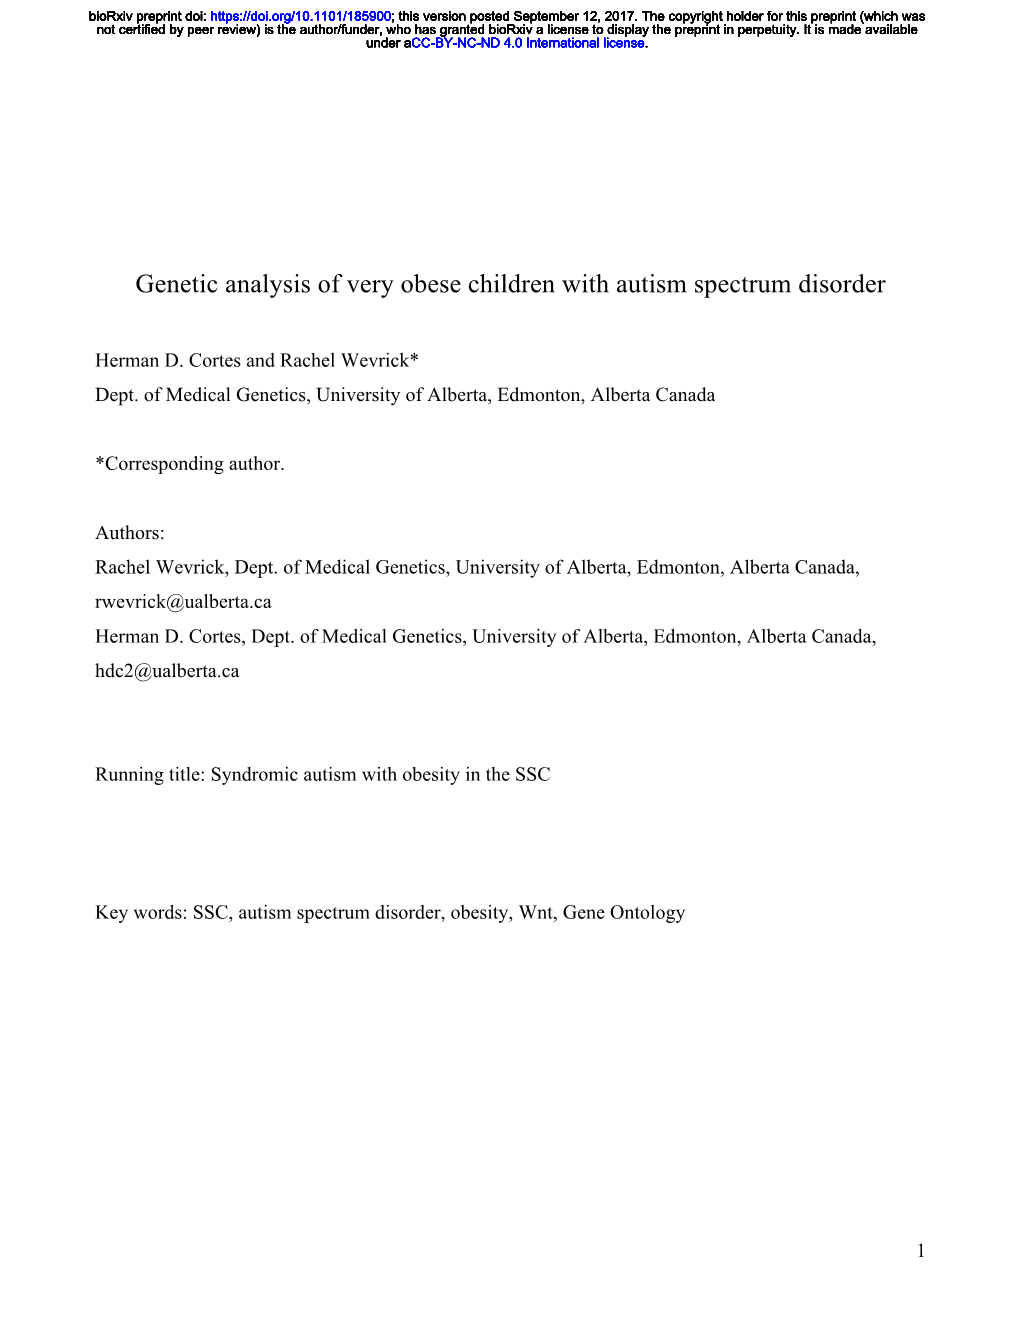 Genetic Analysis of Very Obese Children with Autism Spectrum Disorder